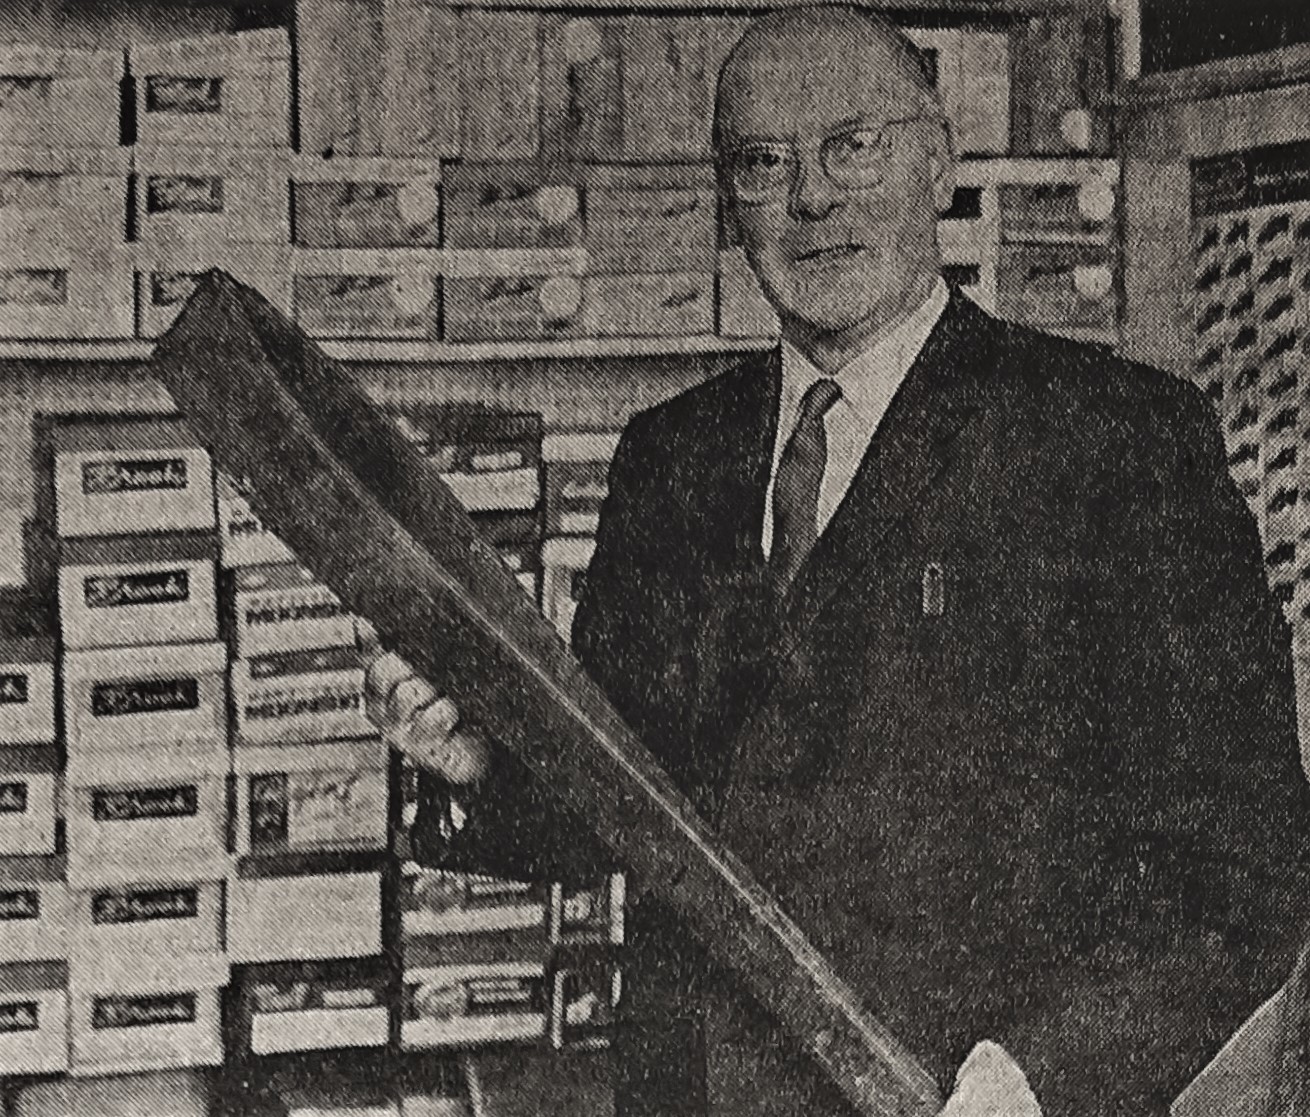 Pictured in 1971, Mr J D Webster, holding a century-old she repairers implement.